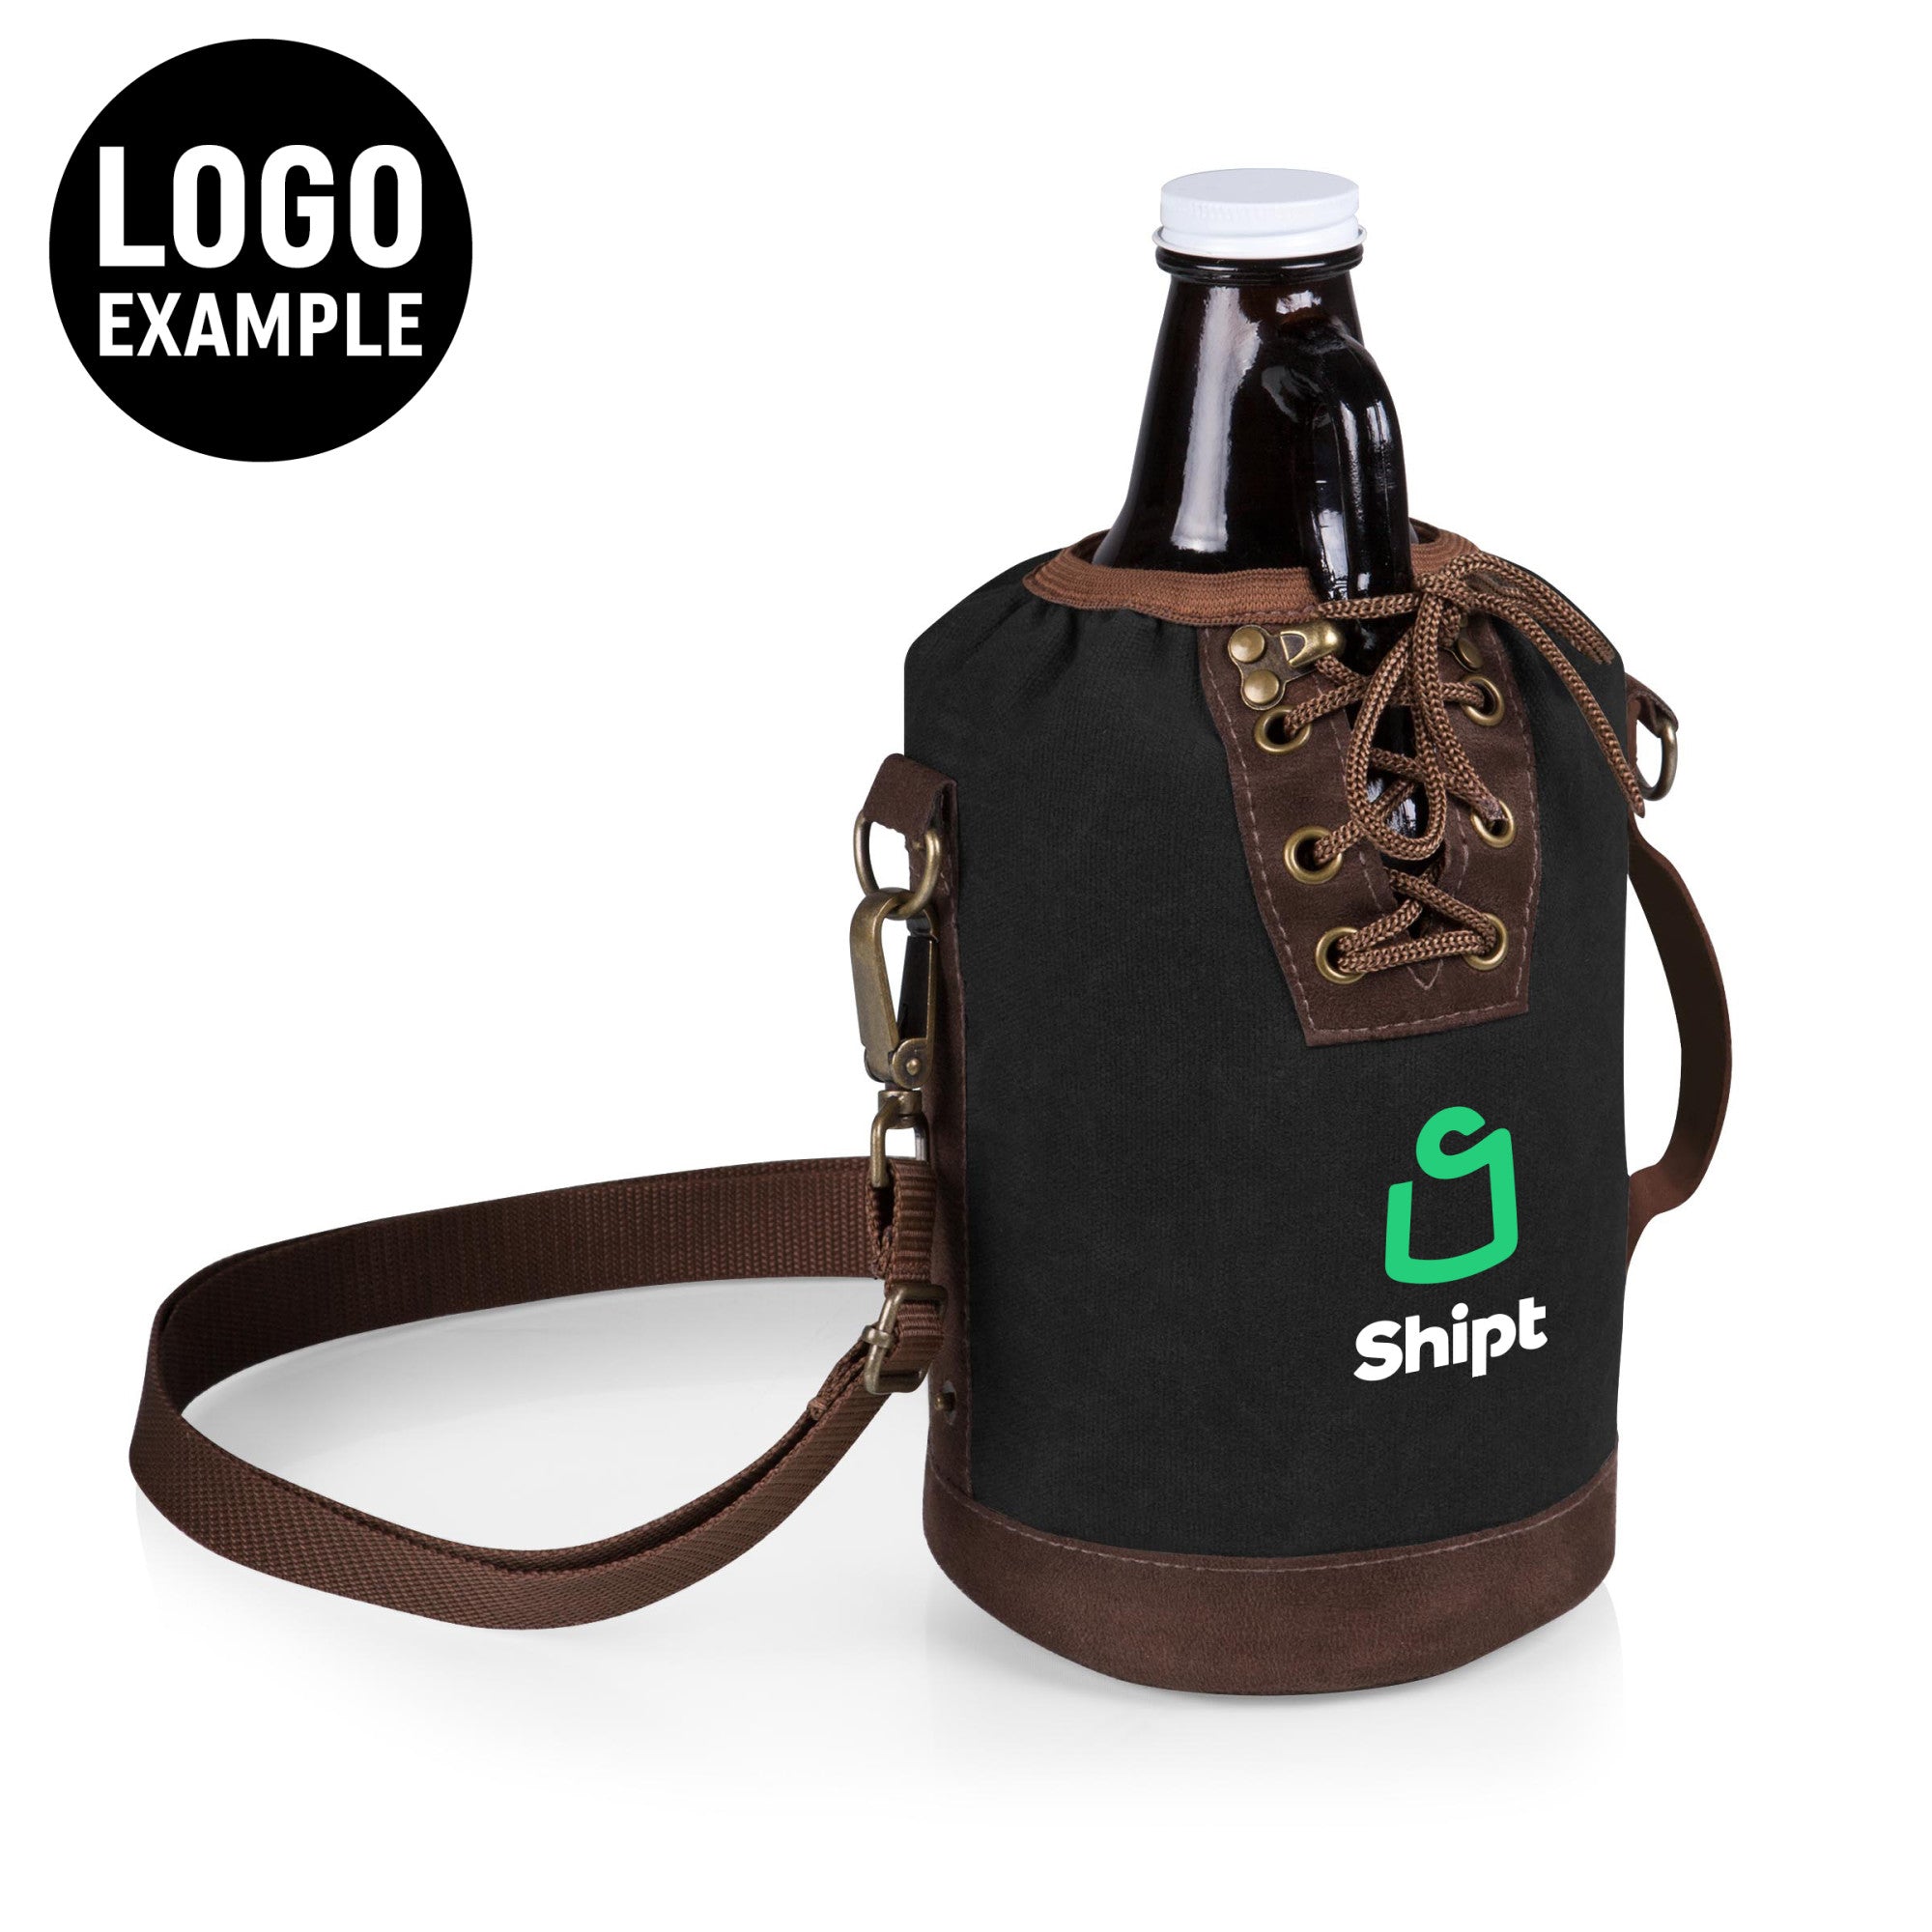 Insulated Growler Tote with 64 oz. Glass Growler